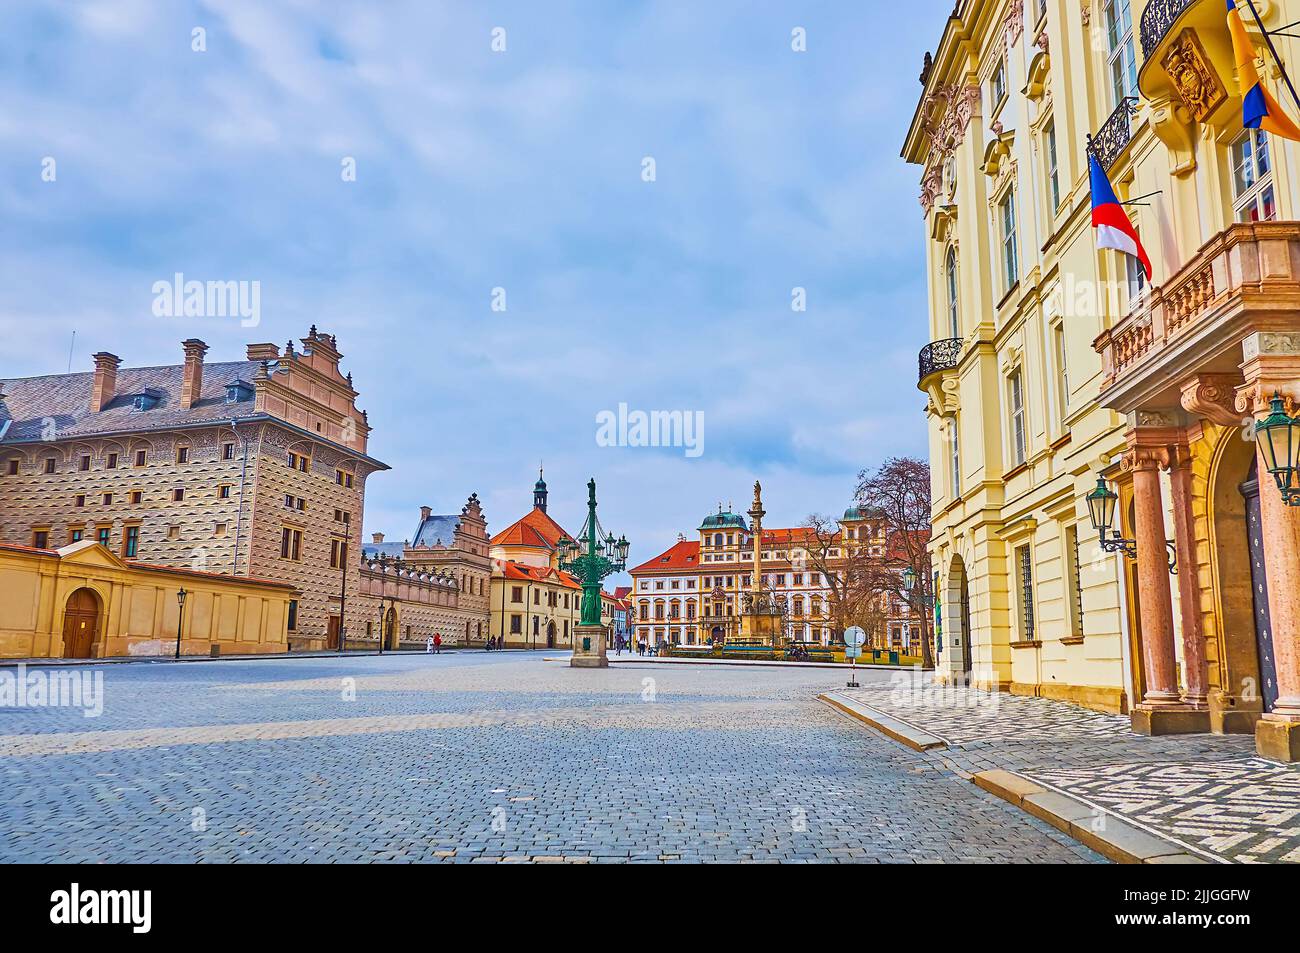 Historic palaces, decorated with sgraffito, moulding and sculptures on the Castle Square of Hradcany, Prague, Czech Republic Stock Photo